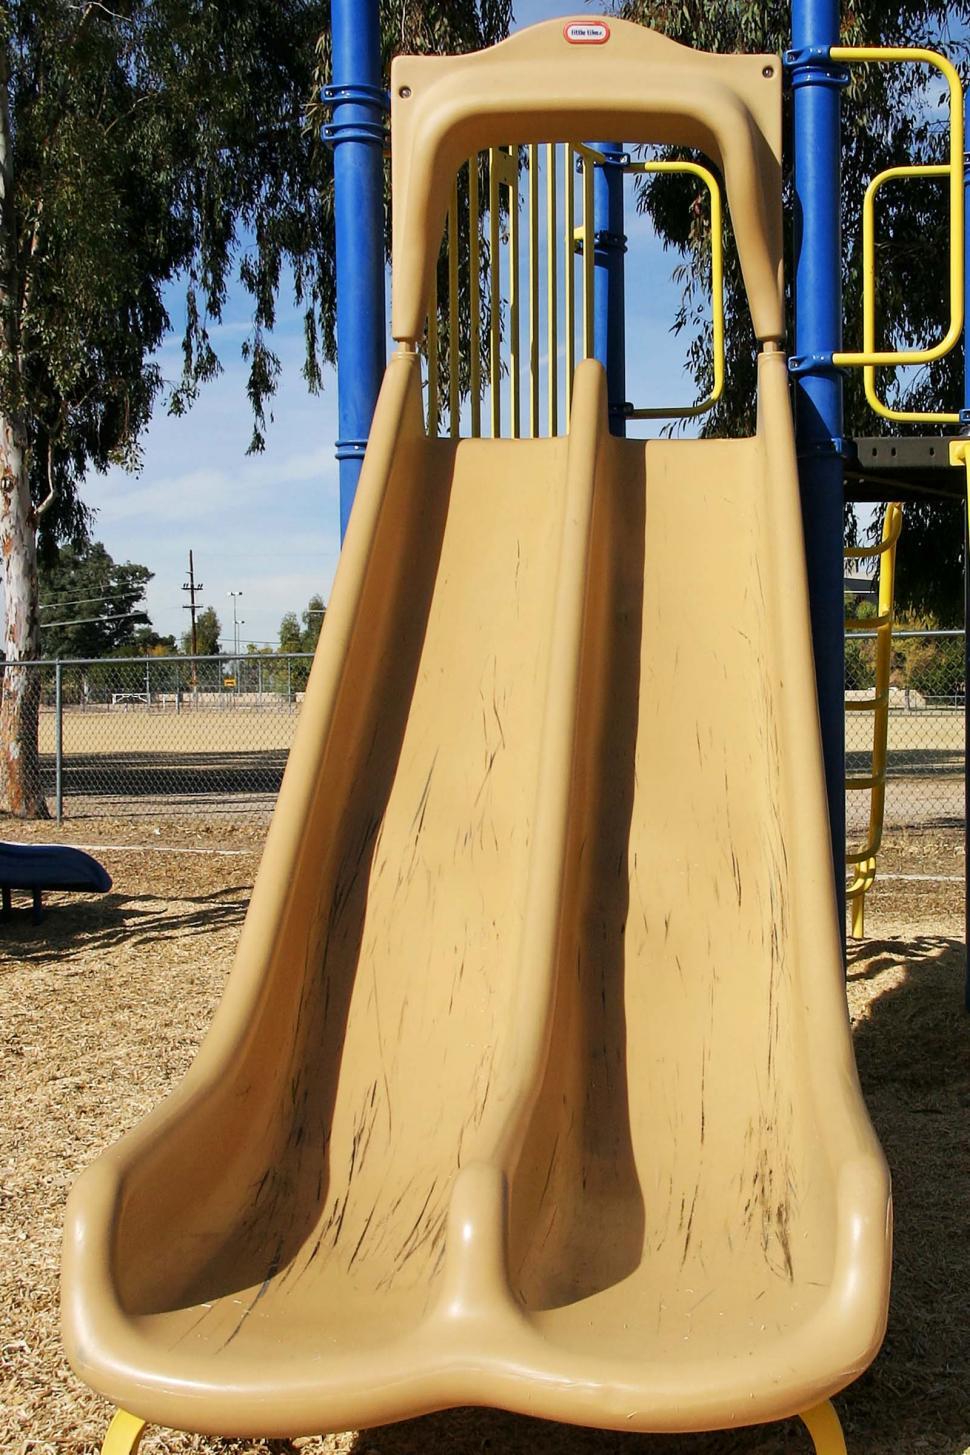 Free Image of Playground With a Slide in the Middle 